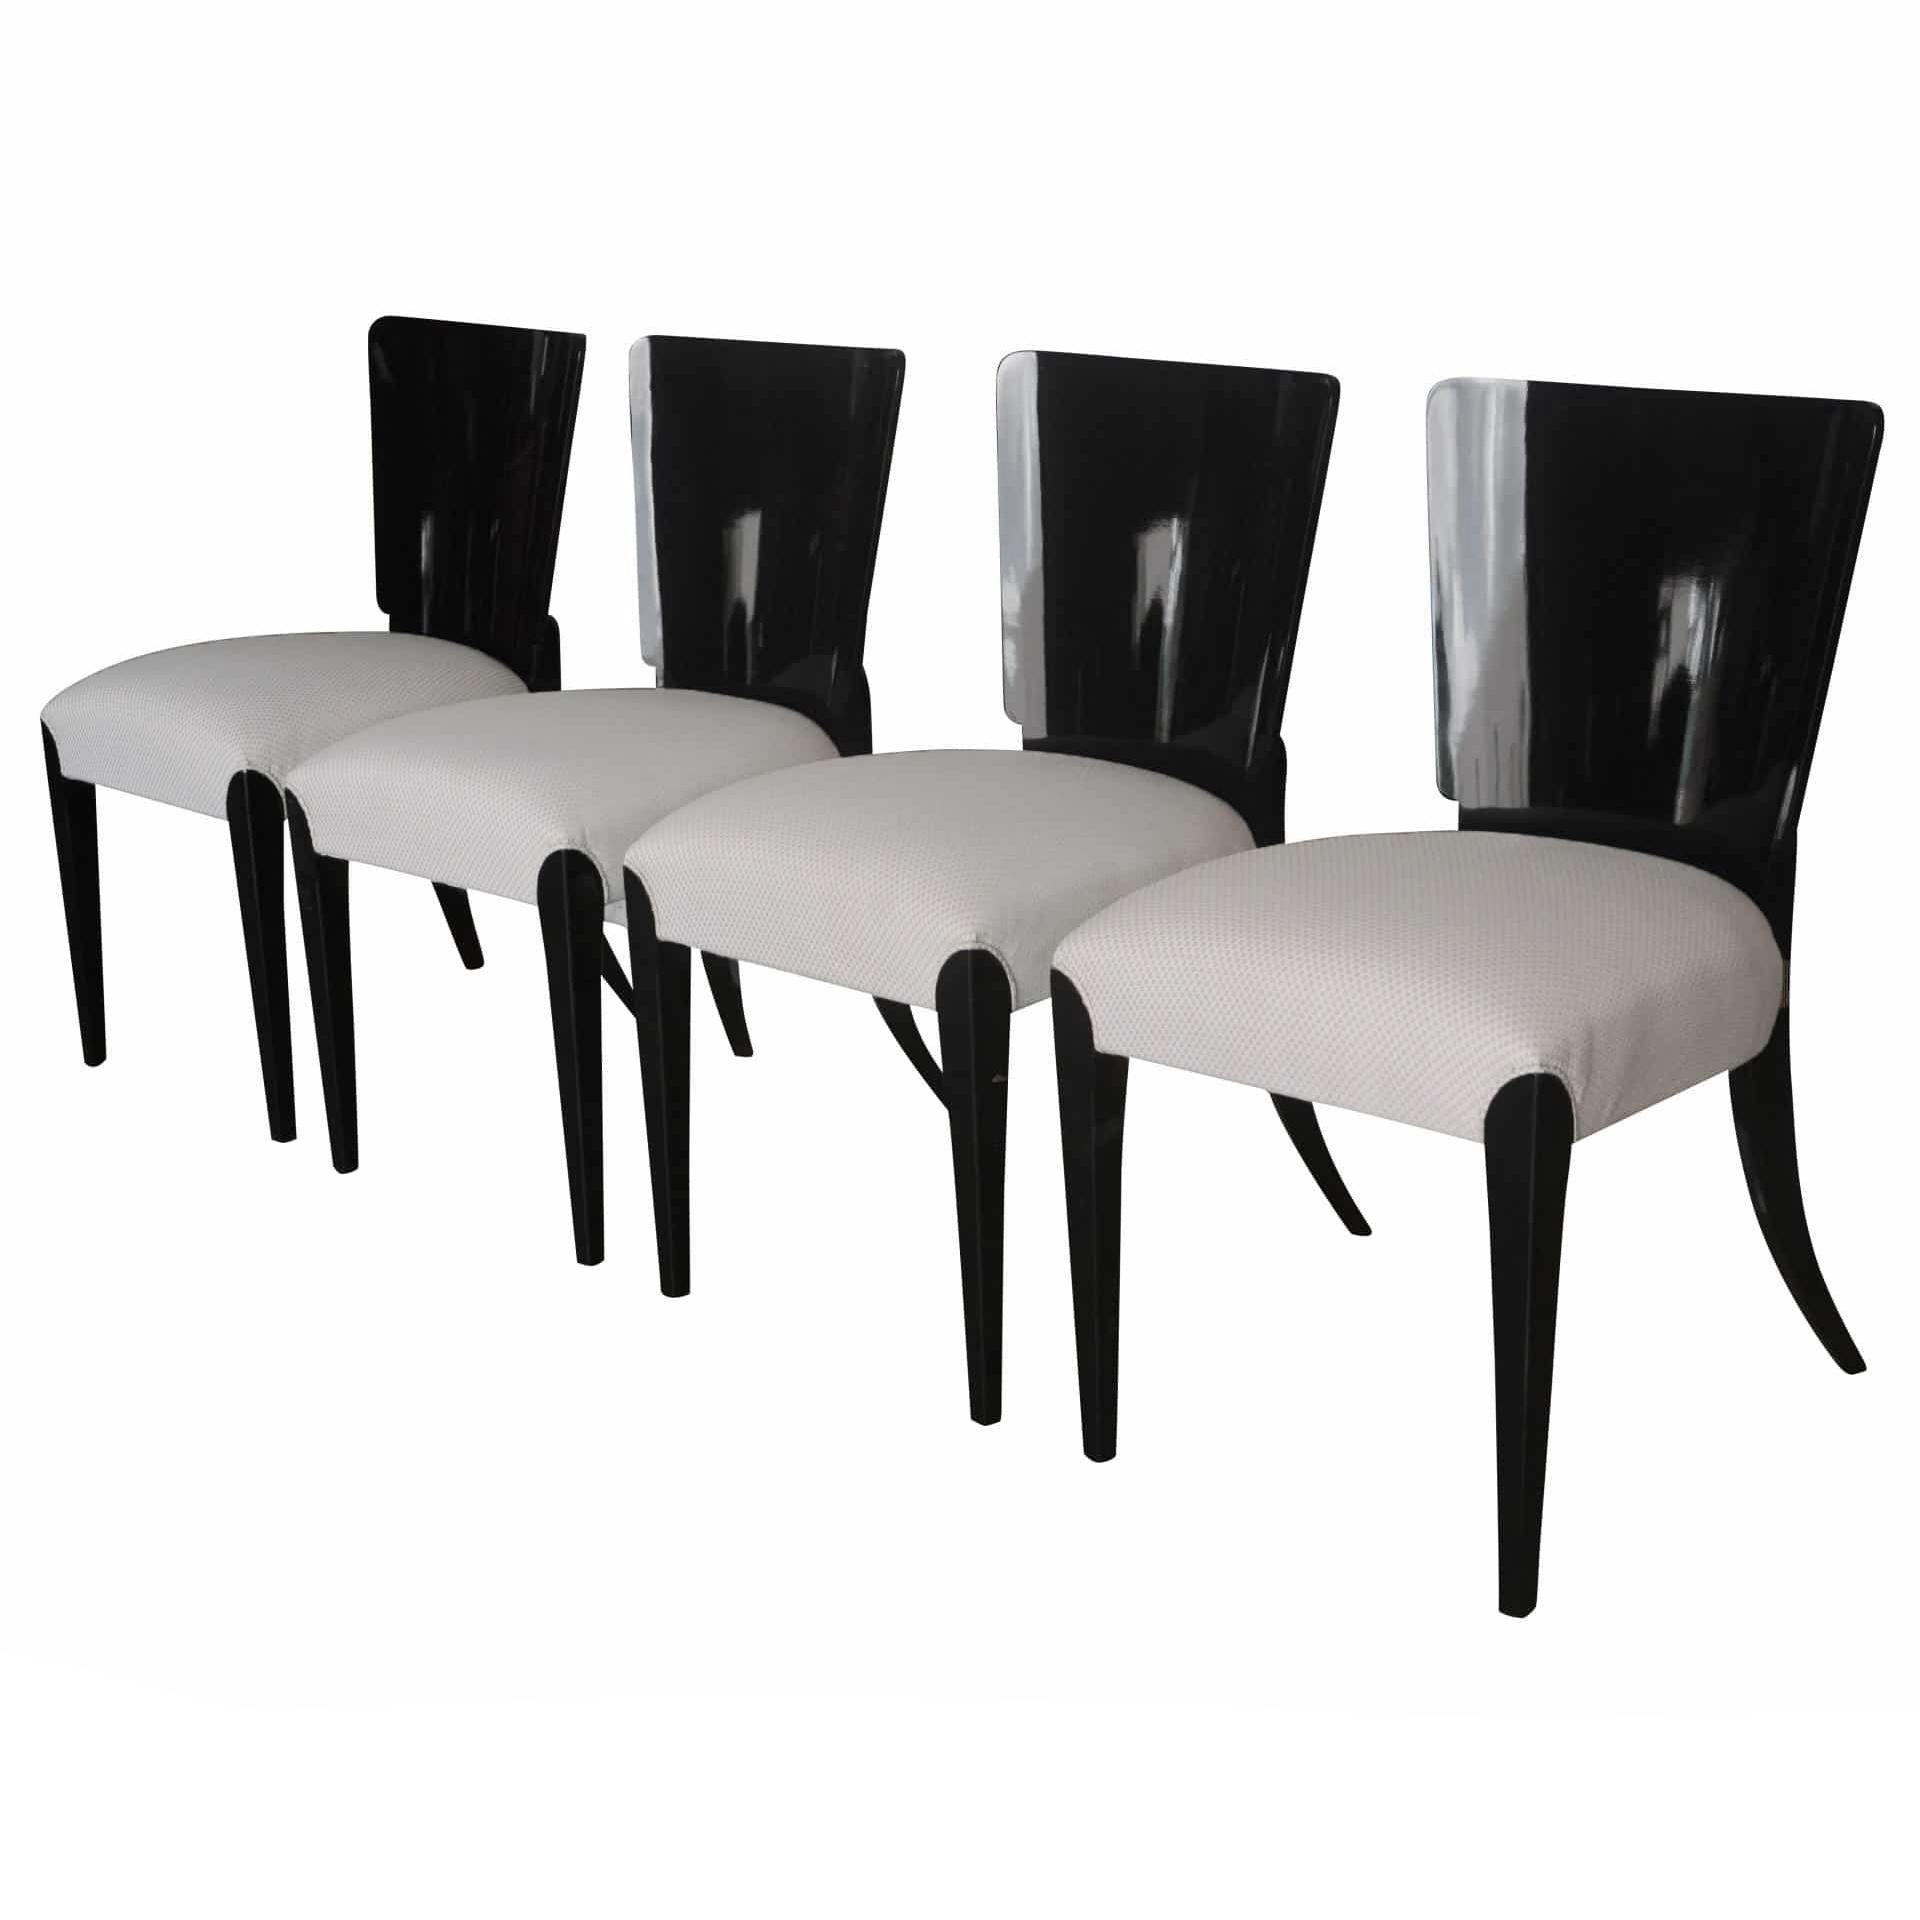 A set of four black ebonized Art Deco chairs made of wood with white upholstery, designed by Jindrich Halabala. Newly upholstered in good condition. Wear consistent with age and use, circa 1930, Czech Republic.

Measures: Seat: 18.5